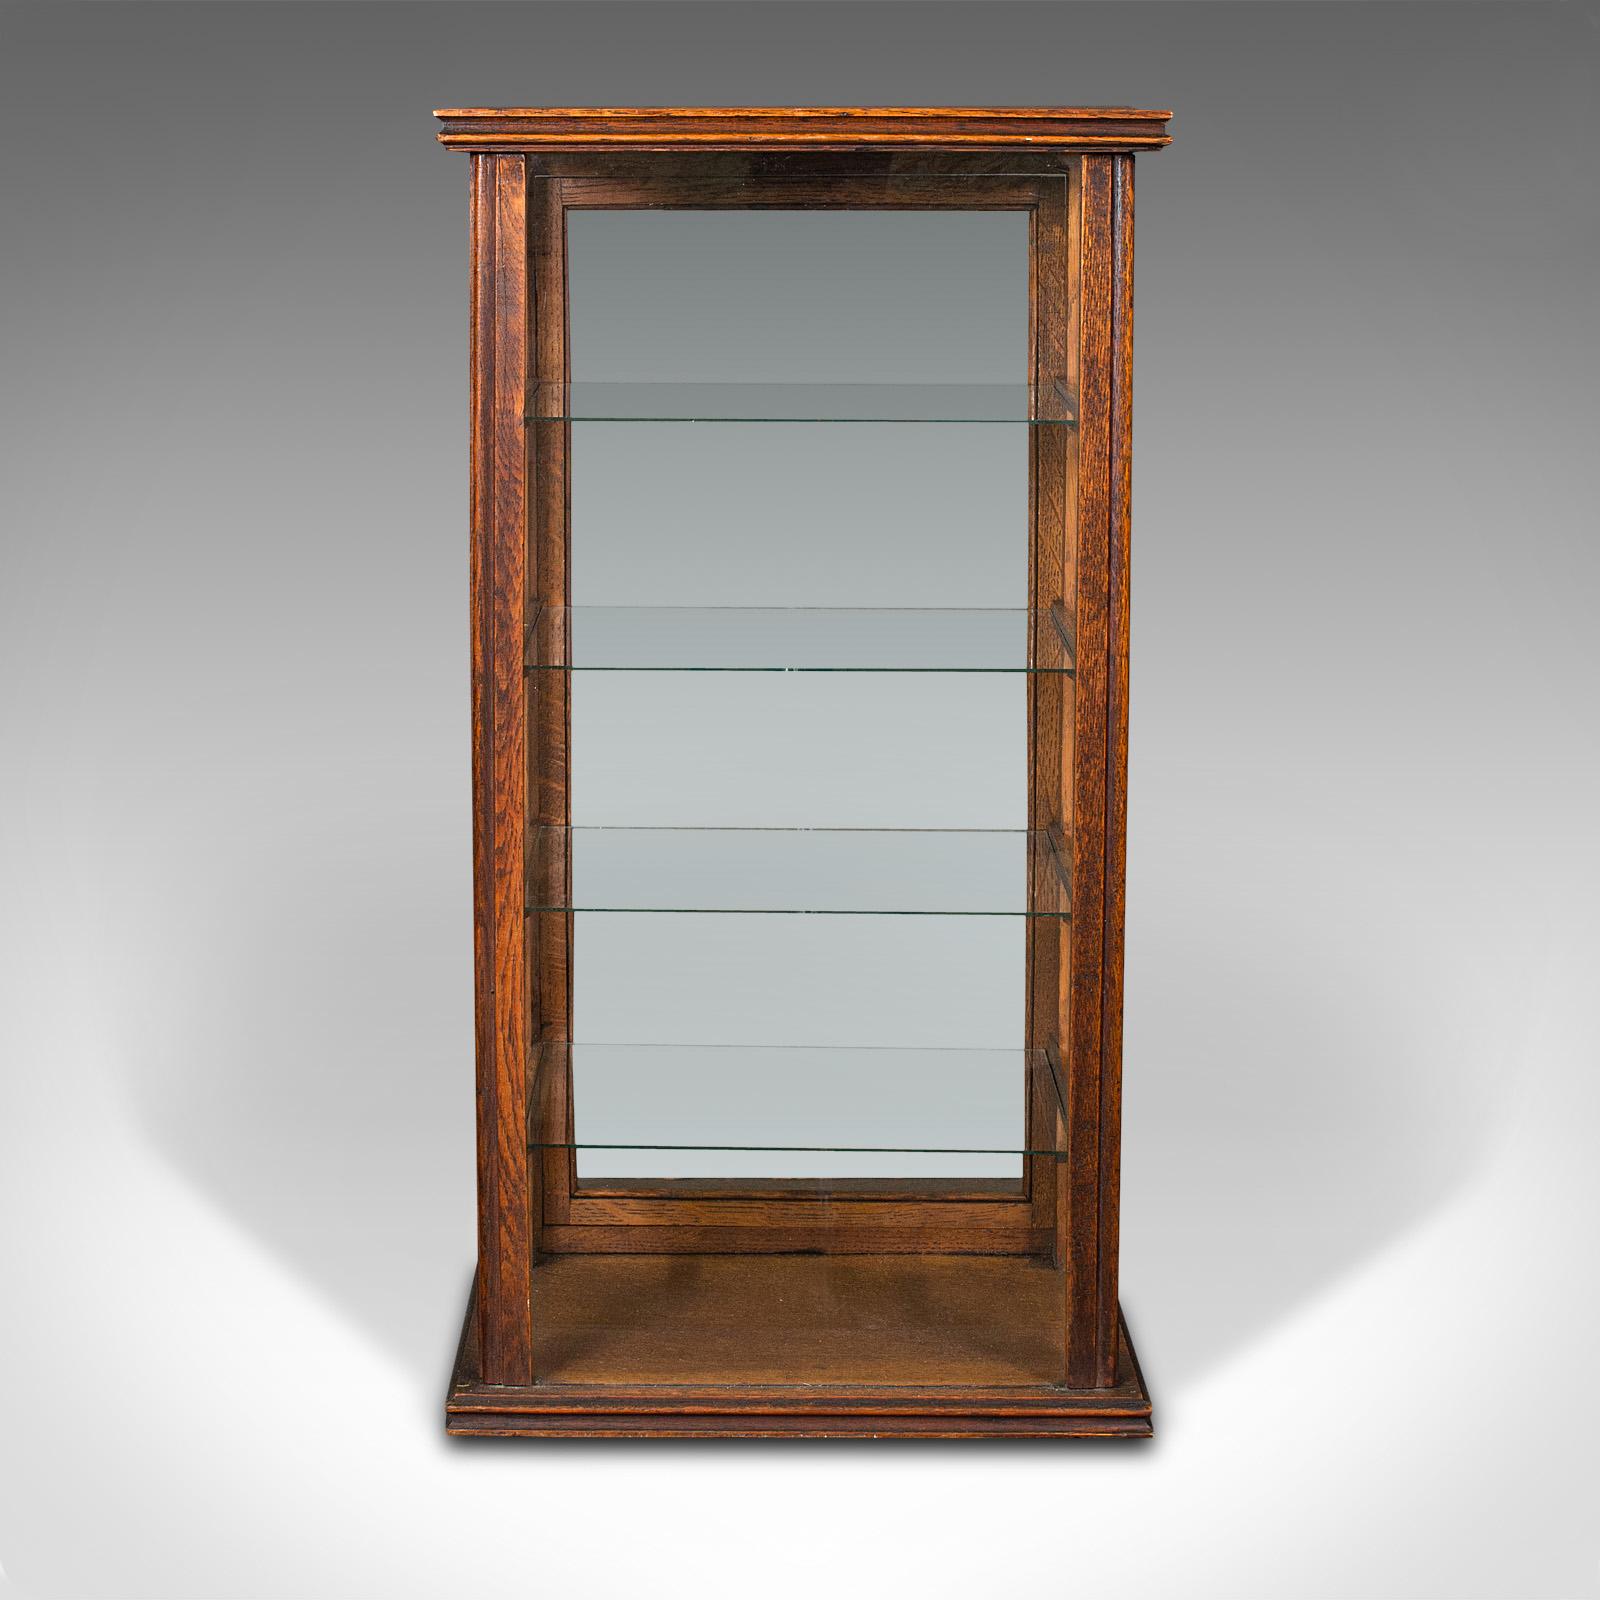 This is an antique cigar display cabinet. An English, oak retail countertop showcase, dating to the Edwardian period, circa 1910.

Compact and appealing glazed countertop cabinet
Displays a desirable aged patina and in good order
Select oak